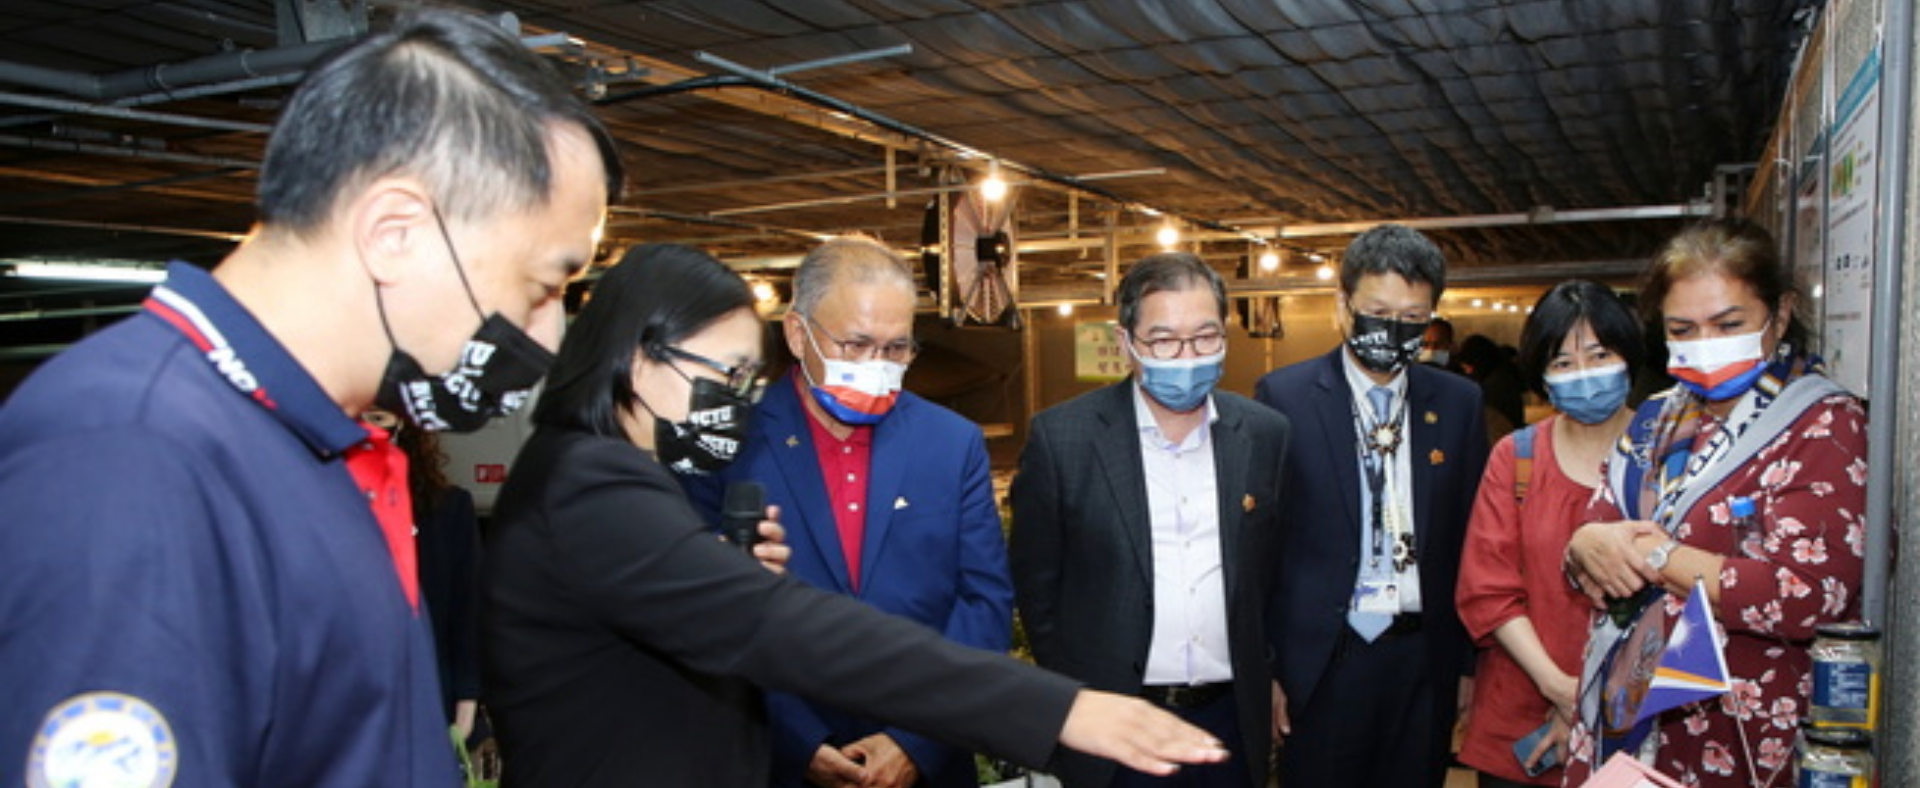 The president of Republic of the Marshall Islands, visited BCST medical plant AI cultivation.